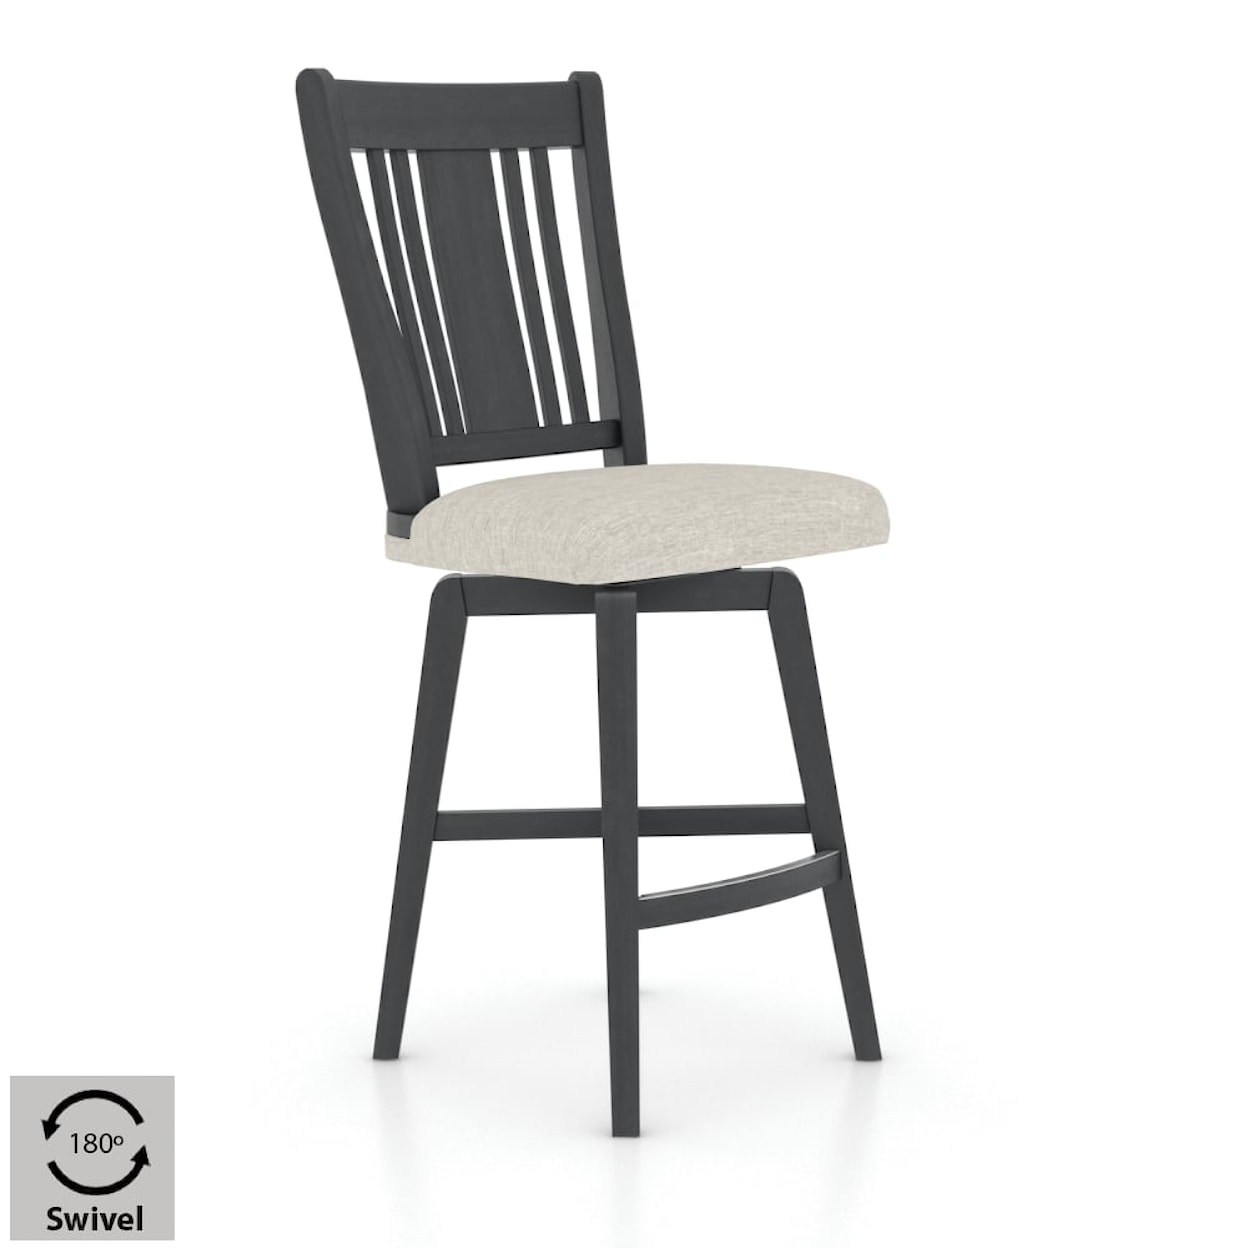 Canadel Canadel Customizable Counter Swivel Stool